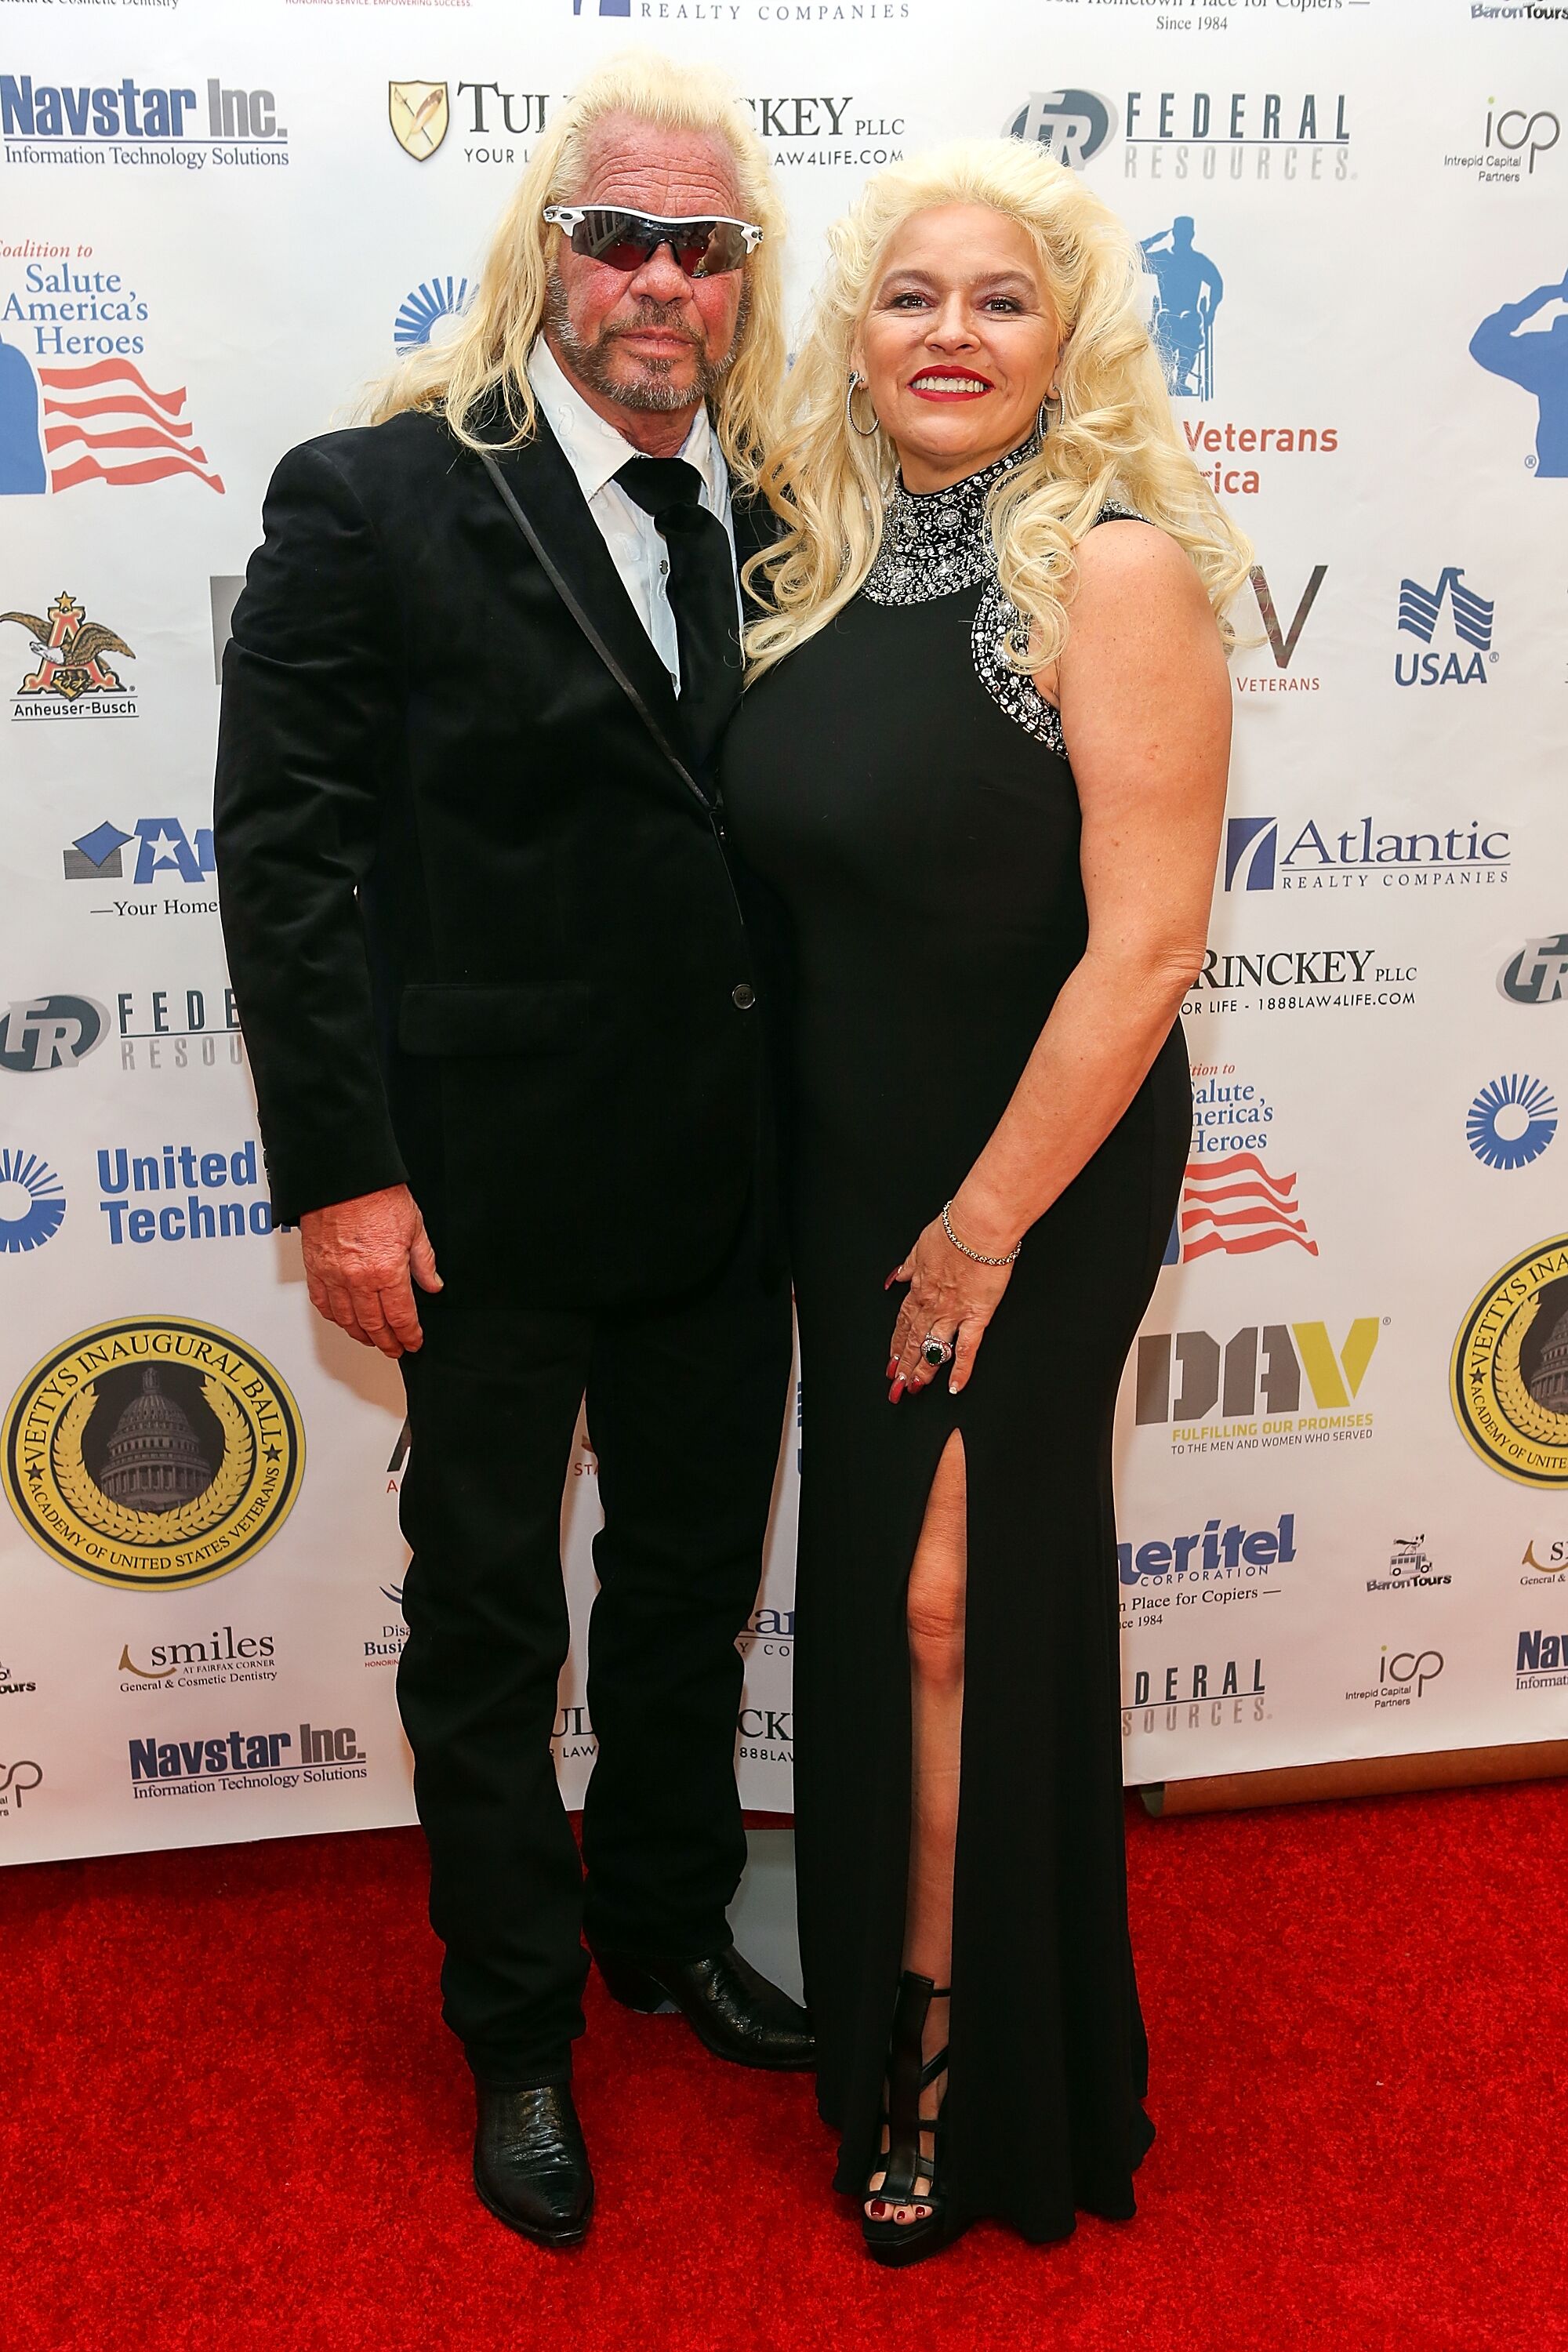 Duane 'Dog the Bounty Hunter" Chapman and Beth Chapman at the Vettys Presidential Inaugural Ball on January 20, 2017 | Photo: Getty Images